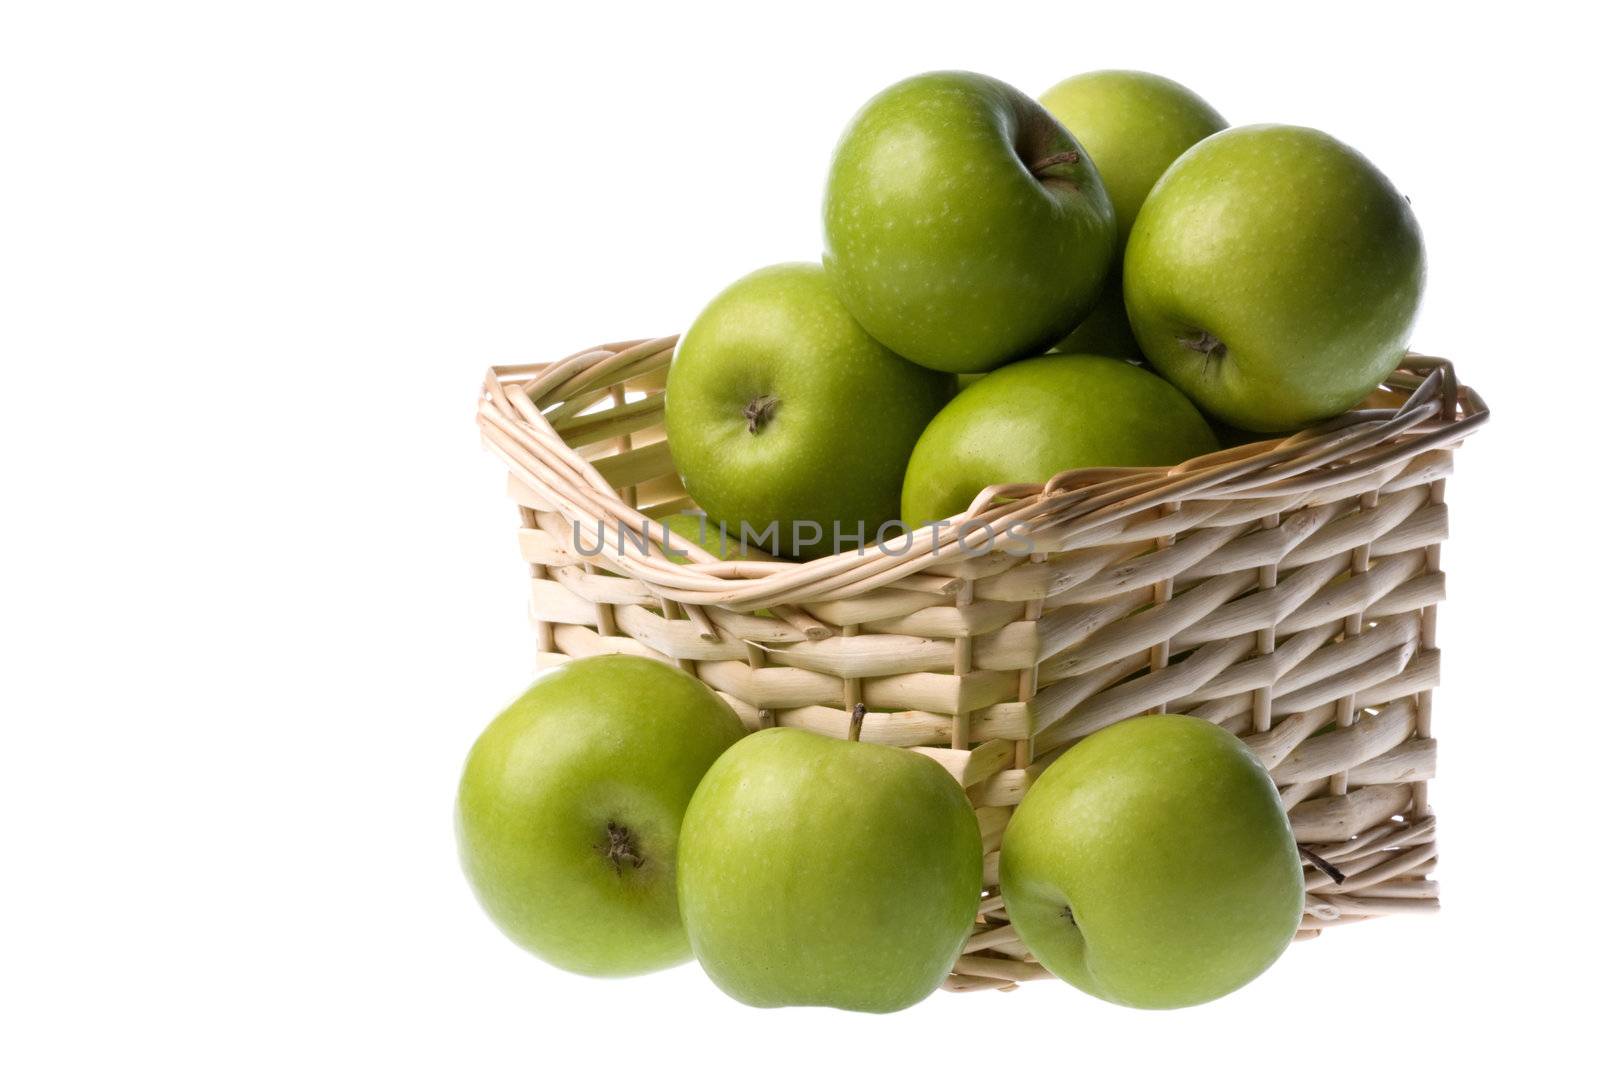 Isolated image of green apples in a basket.